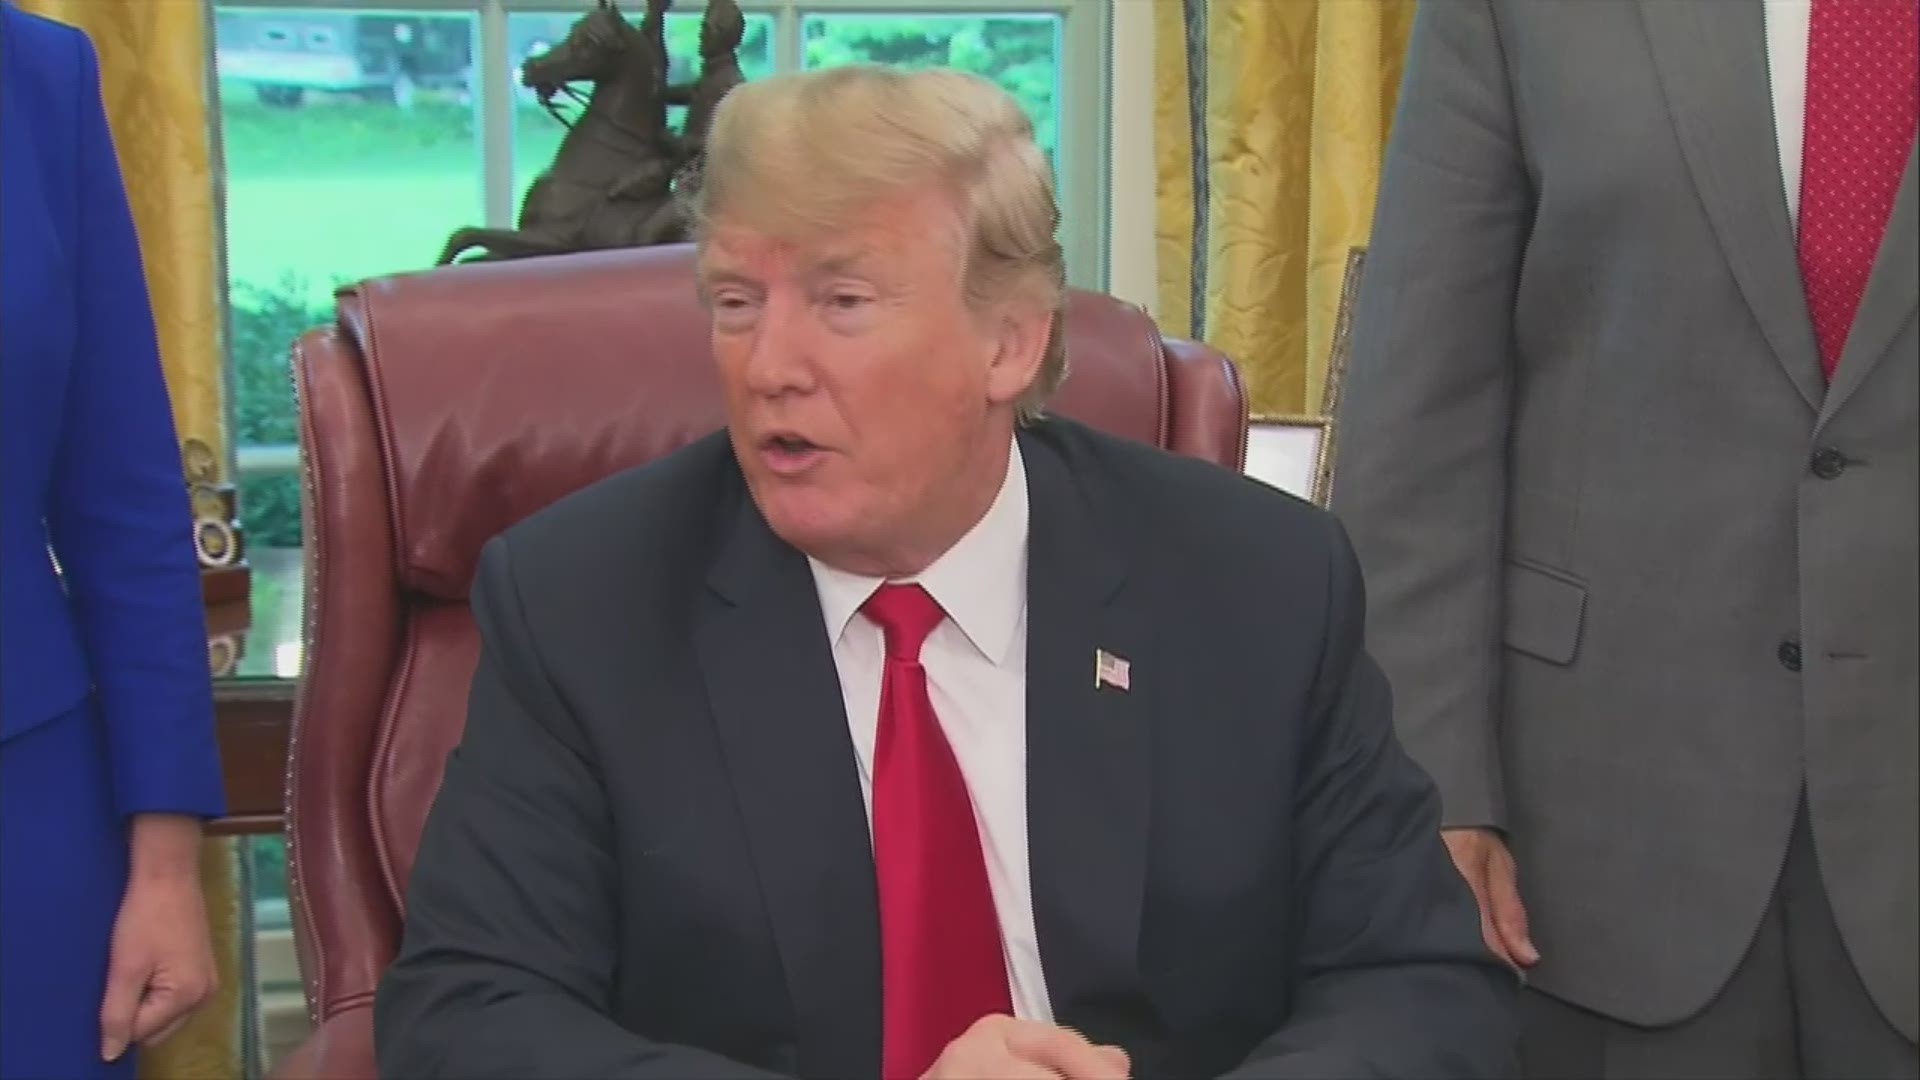 President Trump signs an executive order to end the process of separating migrant families at the border.